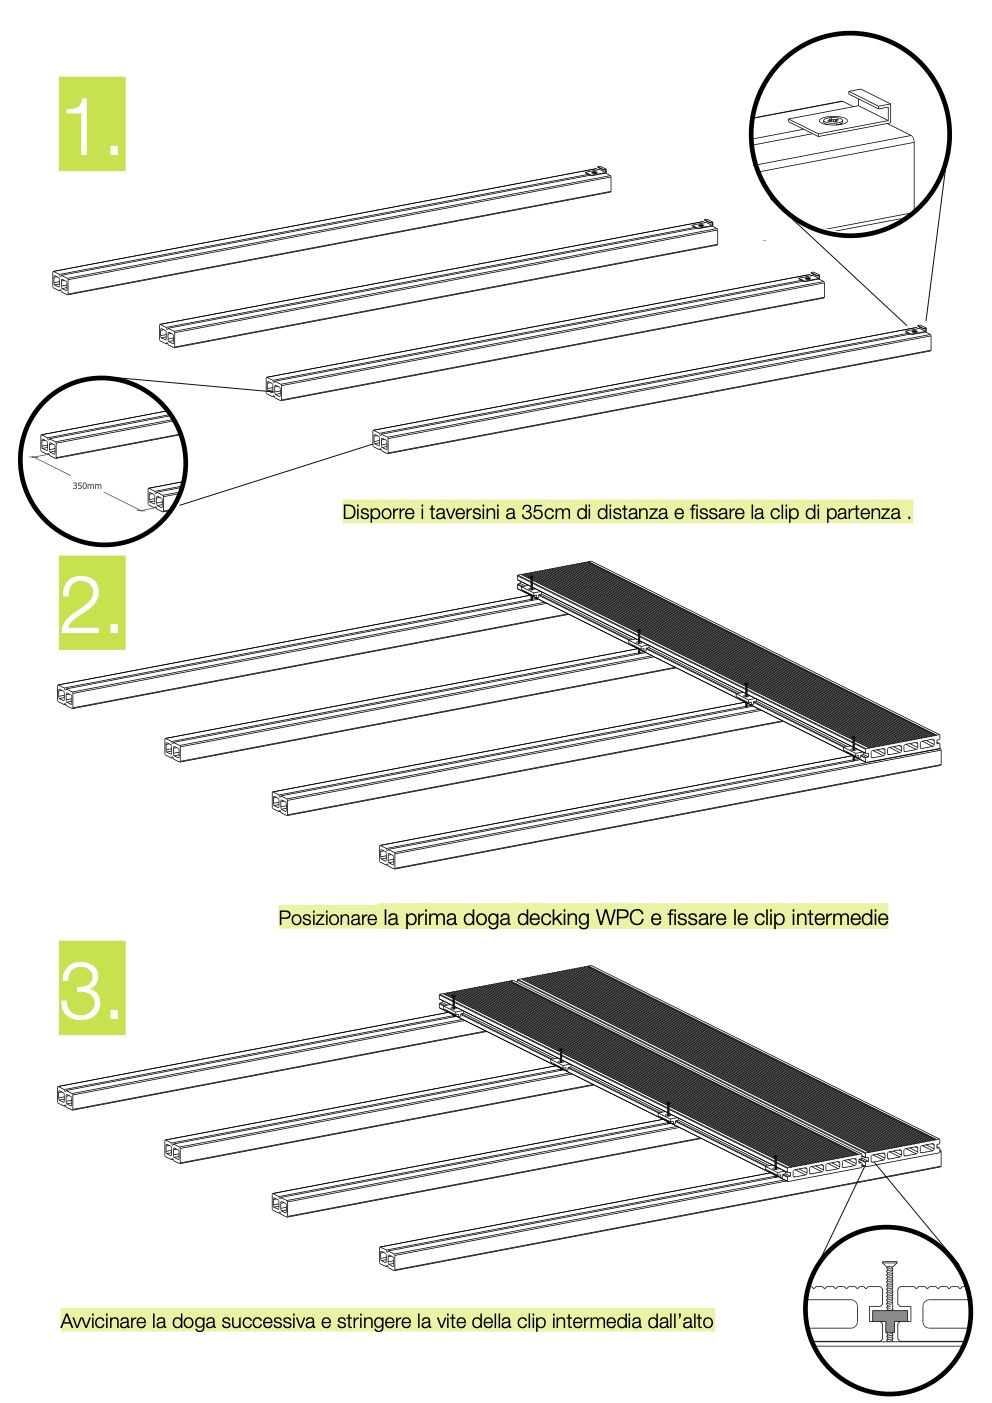 posa decking WPC in tre passaggi 3steps guide